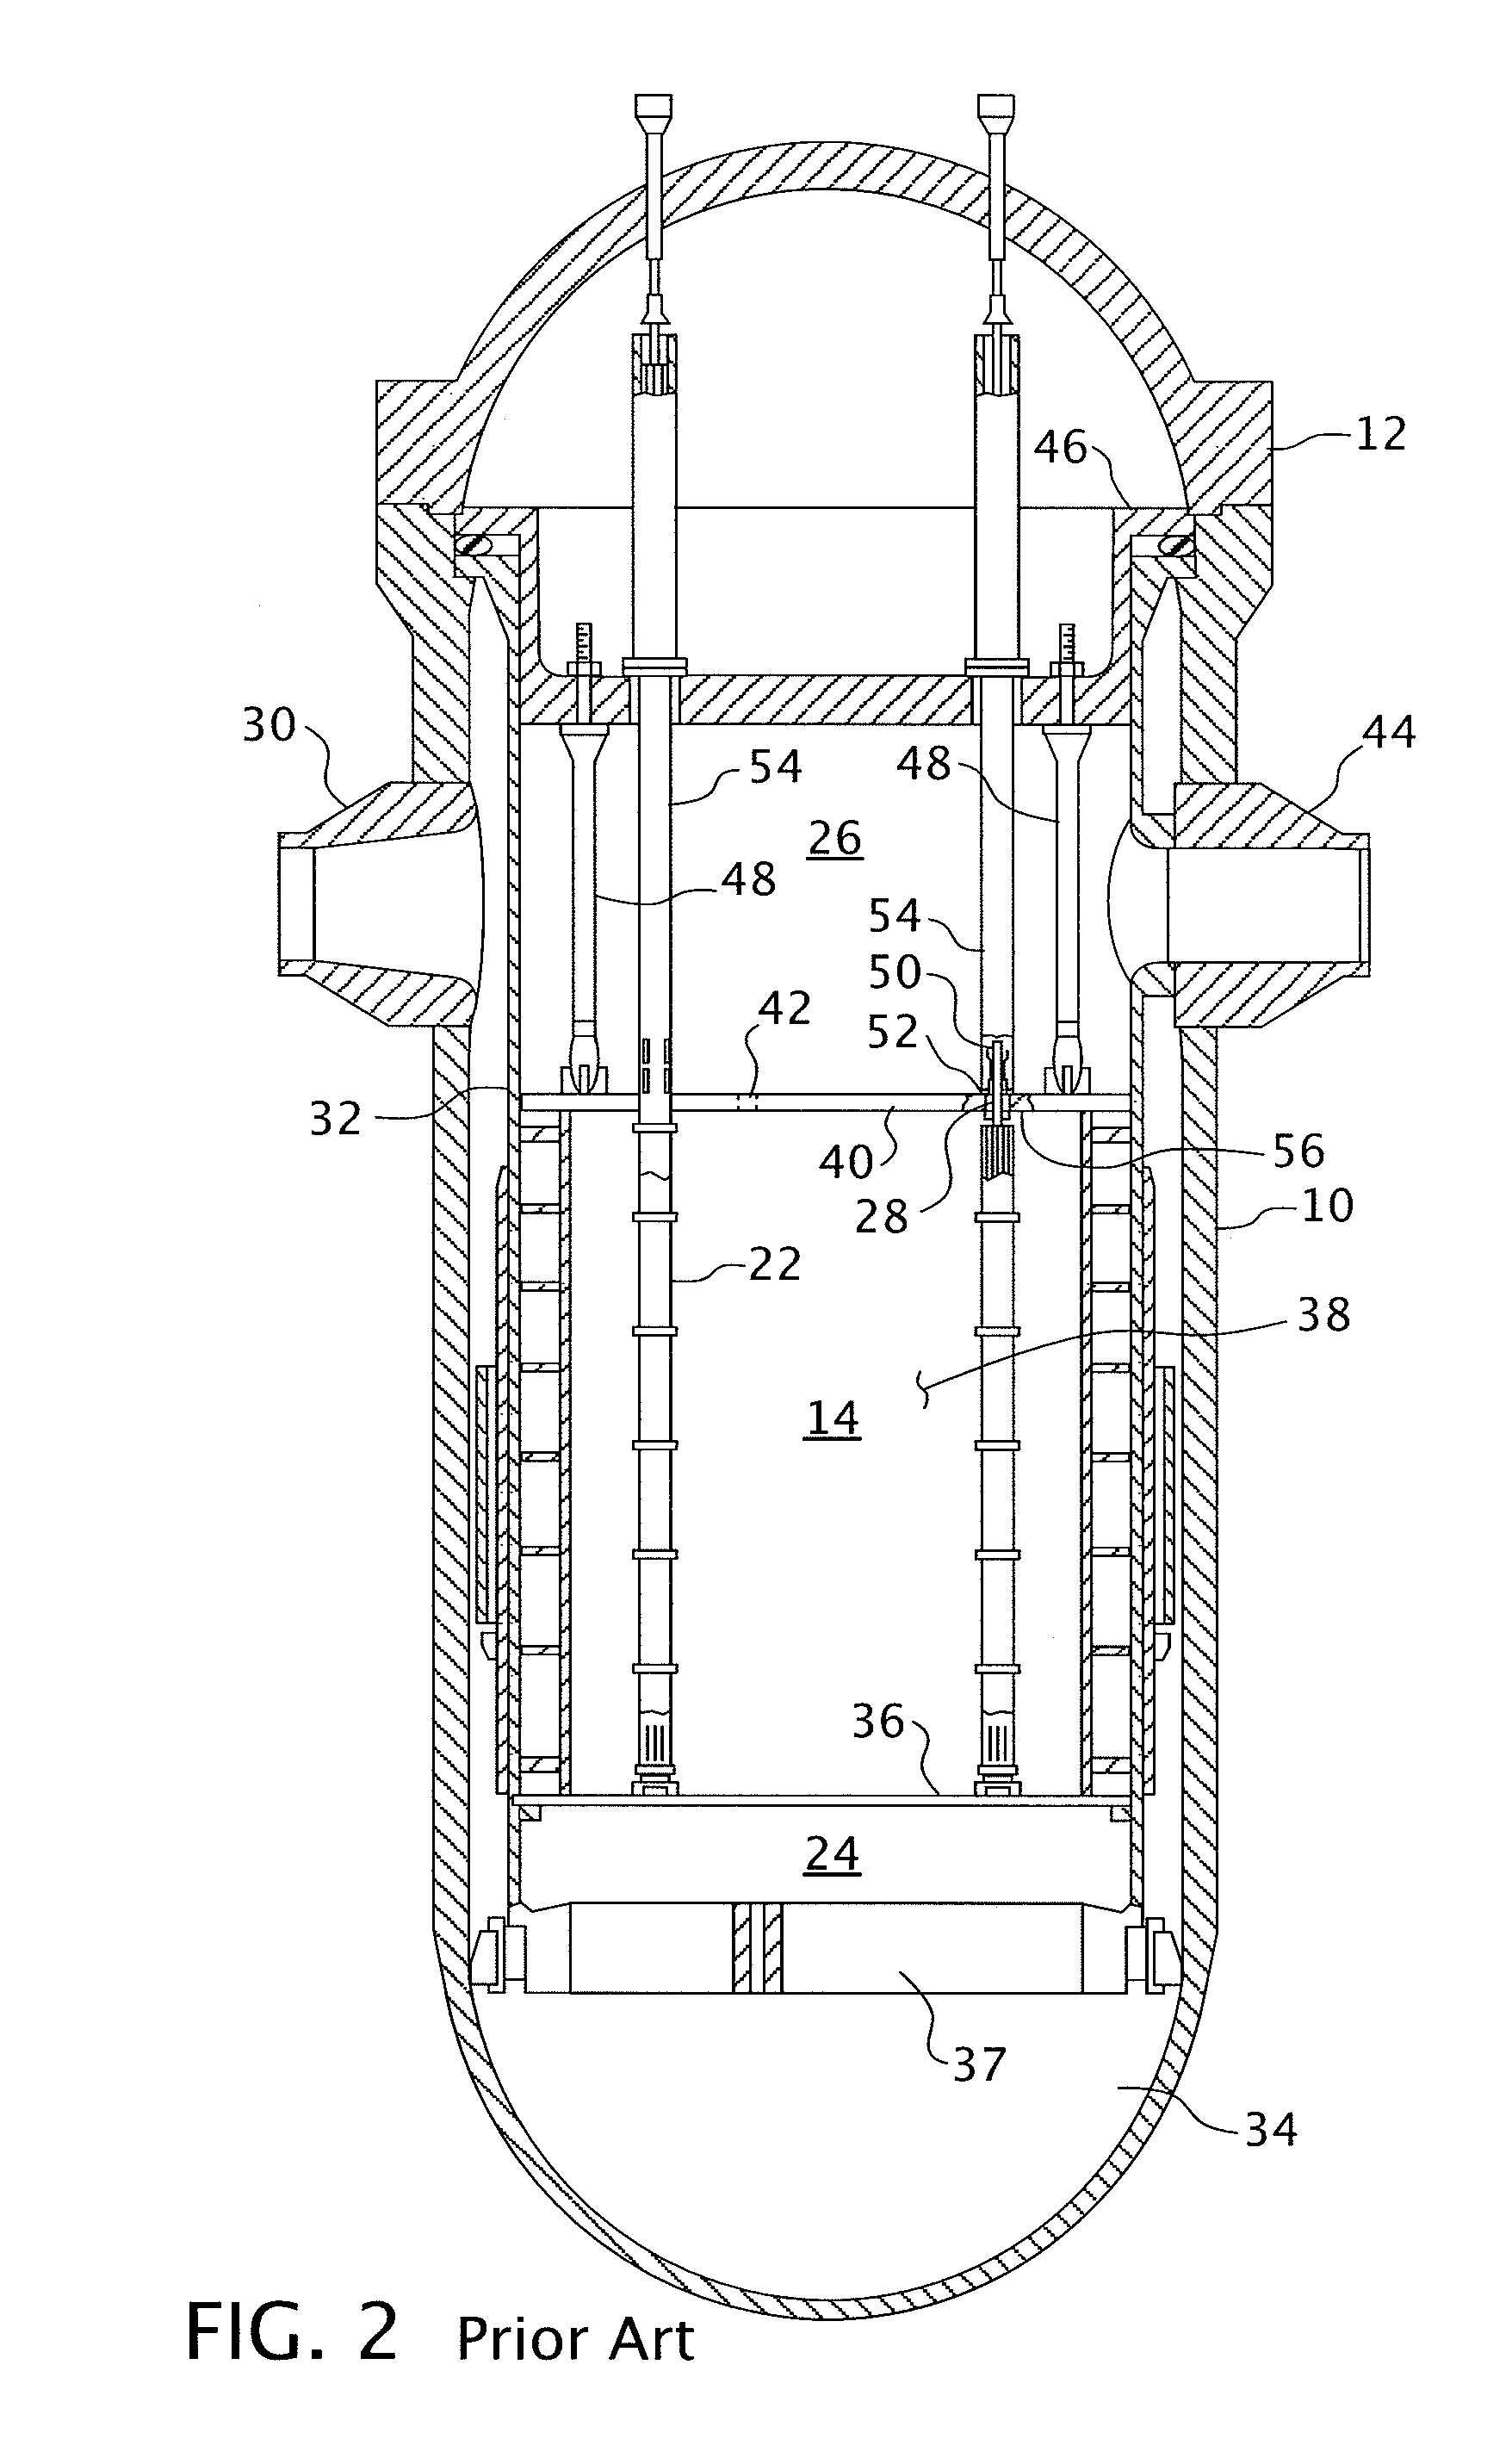 Methodology for modeling the fuel rod power distribution within a nuclear reactor core